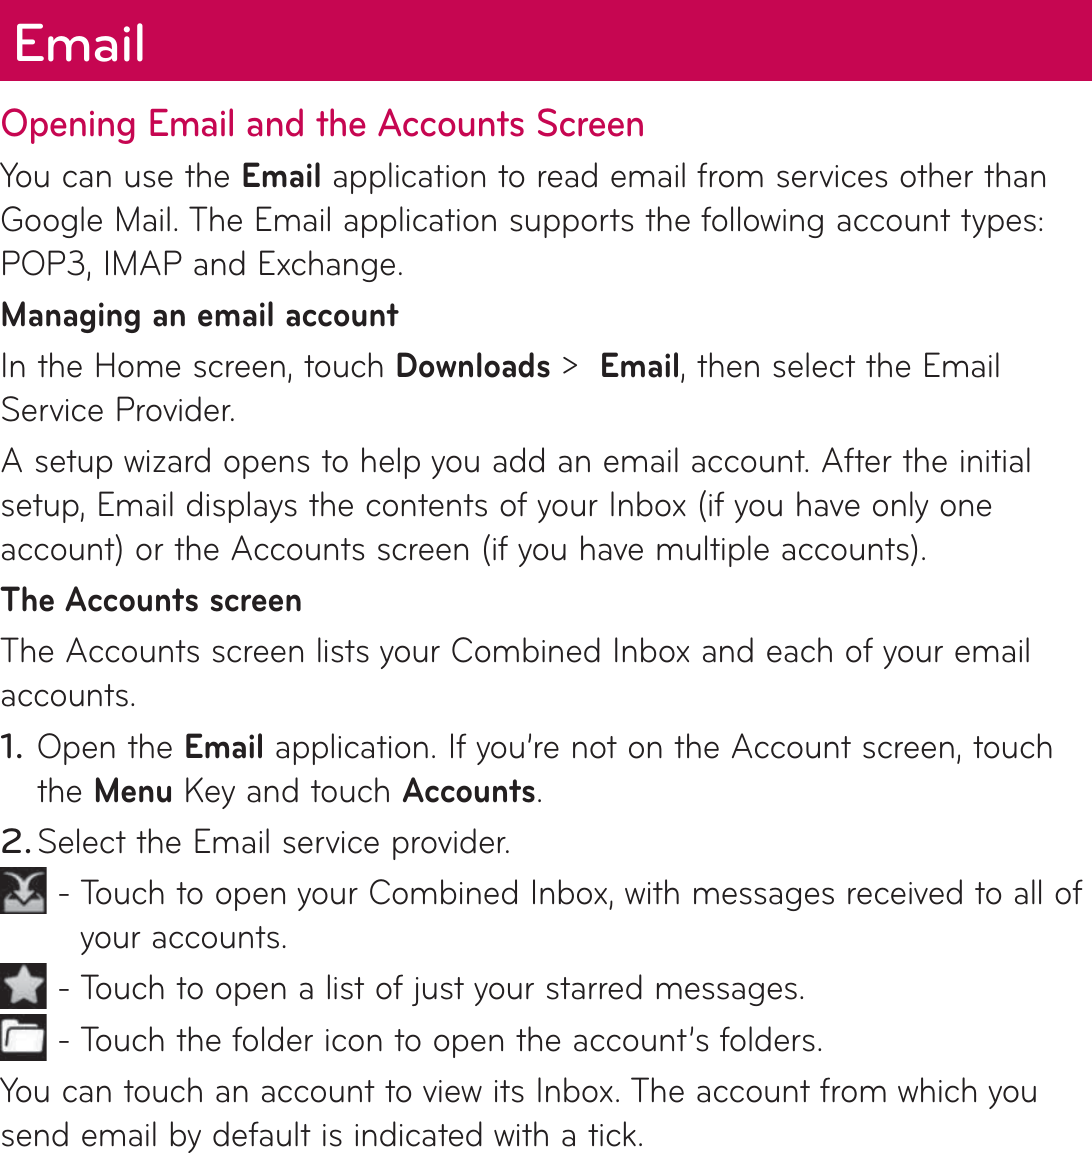 Opening Email and the Accounts ScreenYou can use the Email application to read email from services other than Google Mail. The Email application supports the following account types: POP3, IMAP and Exchange.Managing an email accountIn the Home screen, touch Downloads &gt;  Email, then select the Email Service Provider.A setup wizard opens to help you add an email account. After the initial setup, Email displays the contents of your Inbox (if you have only one account) or the Accounts screen (if you have multiple accounts).The Accounts screenThe Accounts screen lists your Combined Inbox and each of your email accounts. Open the Email application. If you’re not on the Account screen, touch the Menu Key and touch Accounts.Select the Email service provider. -  Touch to open your Combined Inbox, with messages received to all of your accounts. -  Touch to open a list of just your starred messages. -  Touch the folder icon to open the account’s folders.You can touch an account to view its Inbox. The account from which you send email by default is indicated with a tick.1.2.Email 